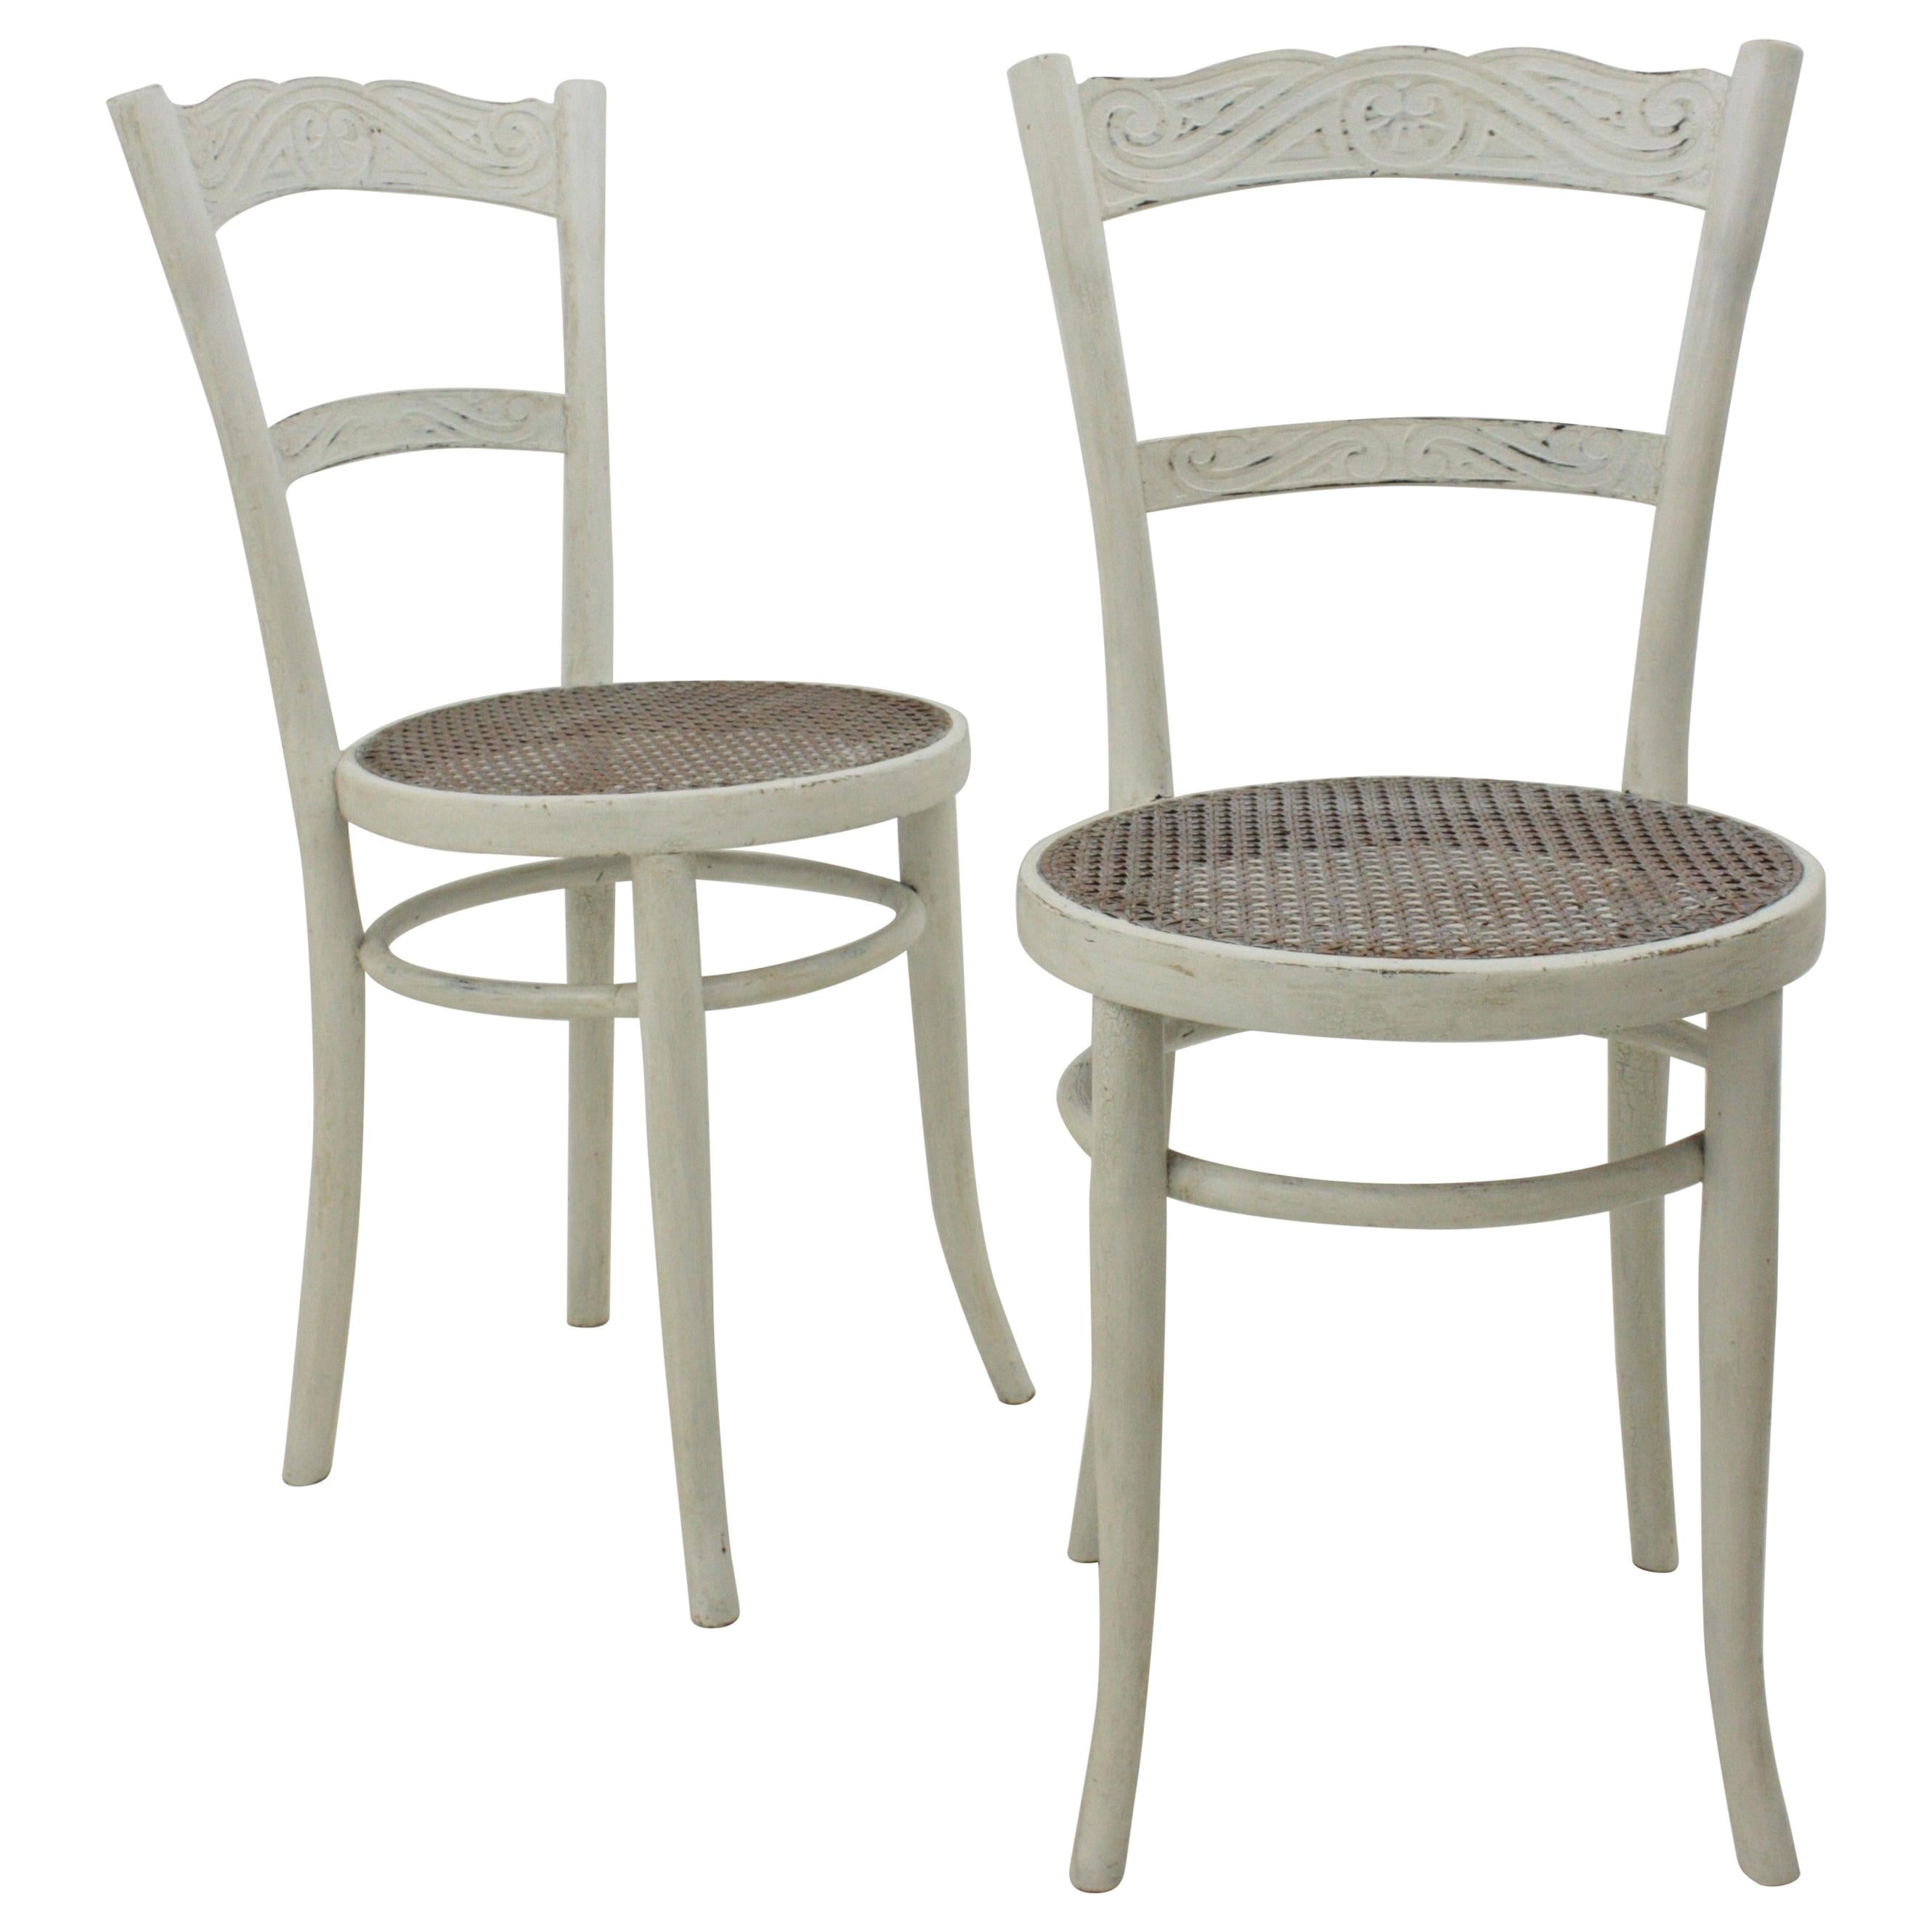 Jacob & Josef Kohn Vienna Secession Patinated Chairs with Wicker Seats, Pair